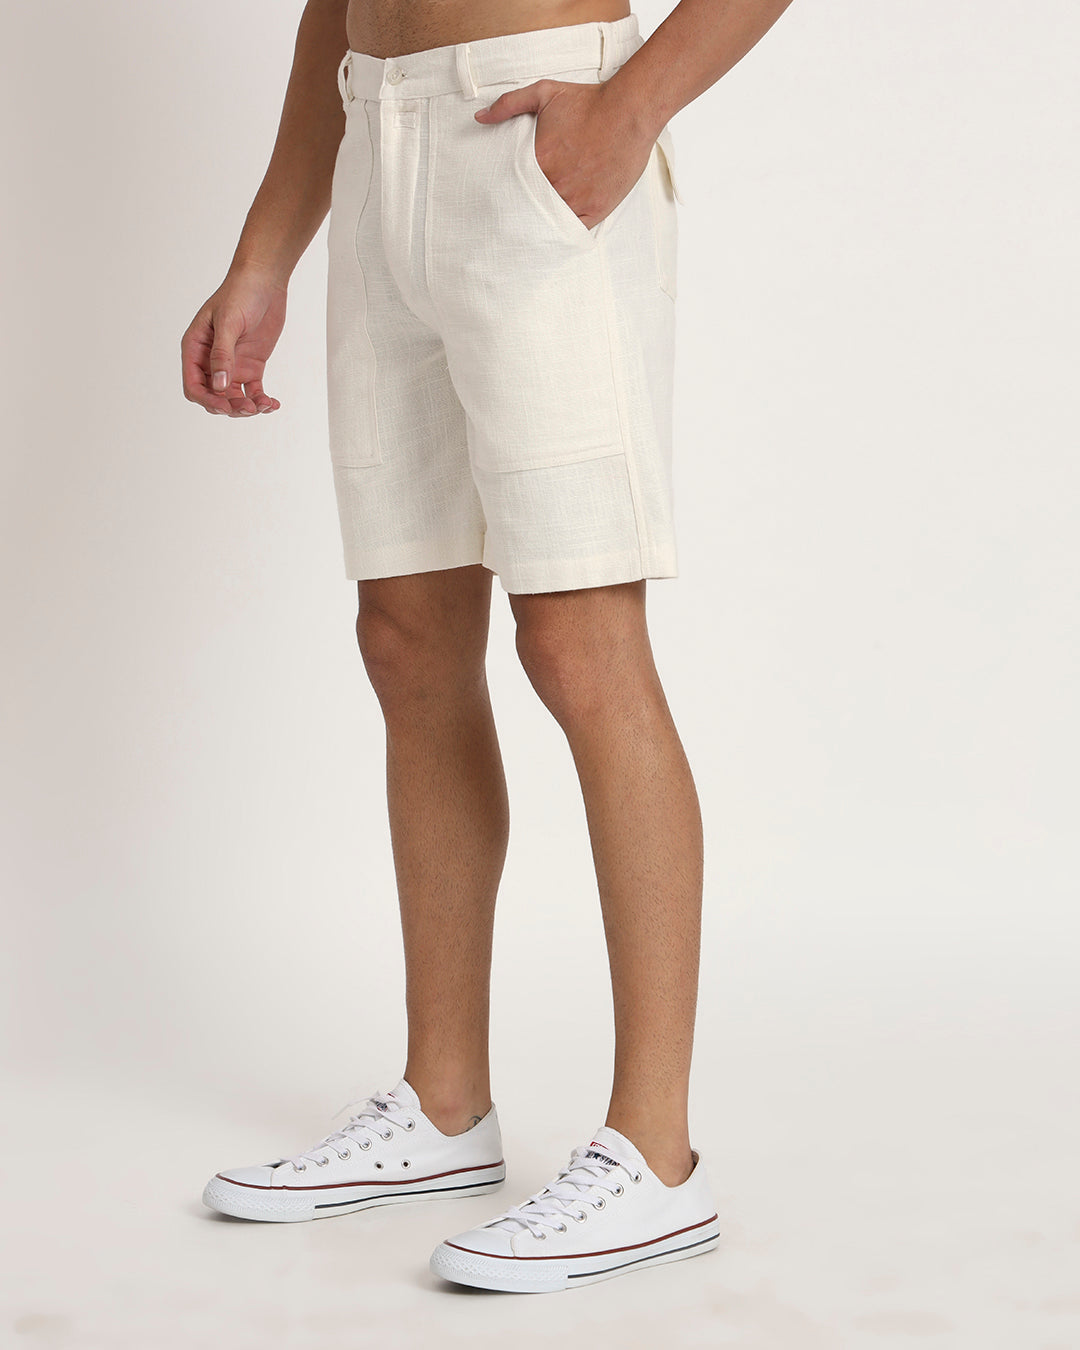 Combo : Patch Pocket Playtime White & Beige Men's Shorts